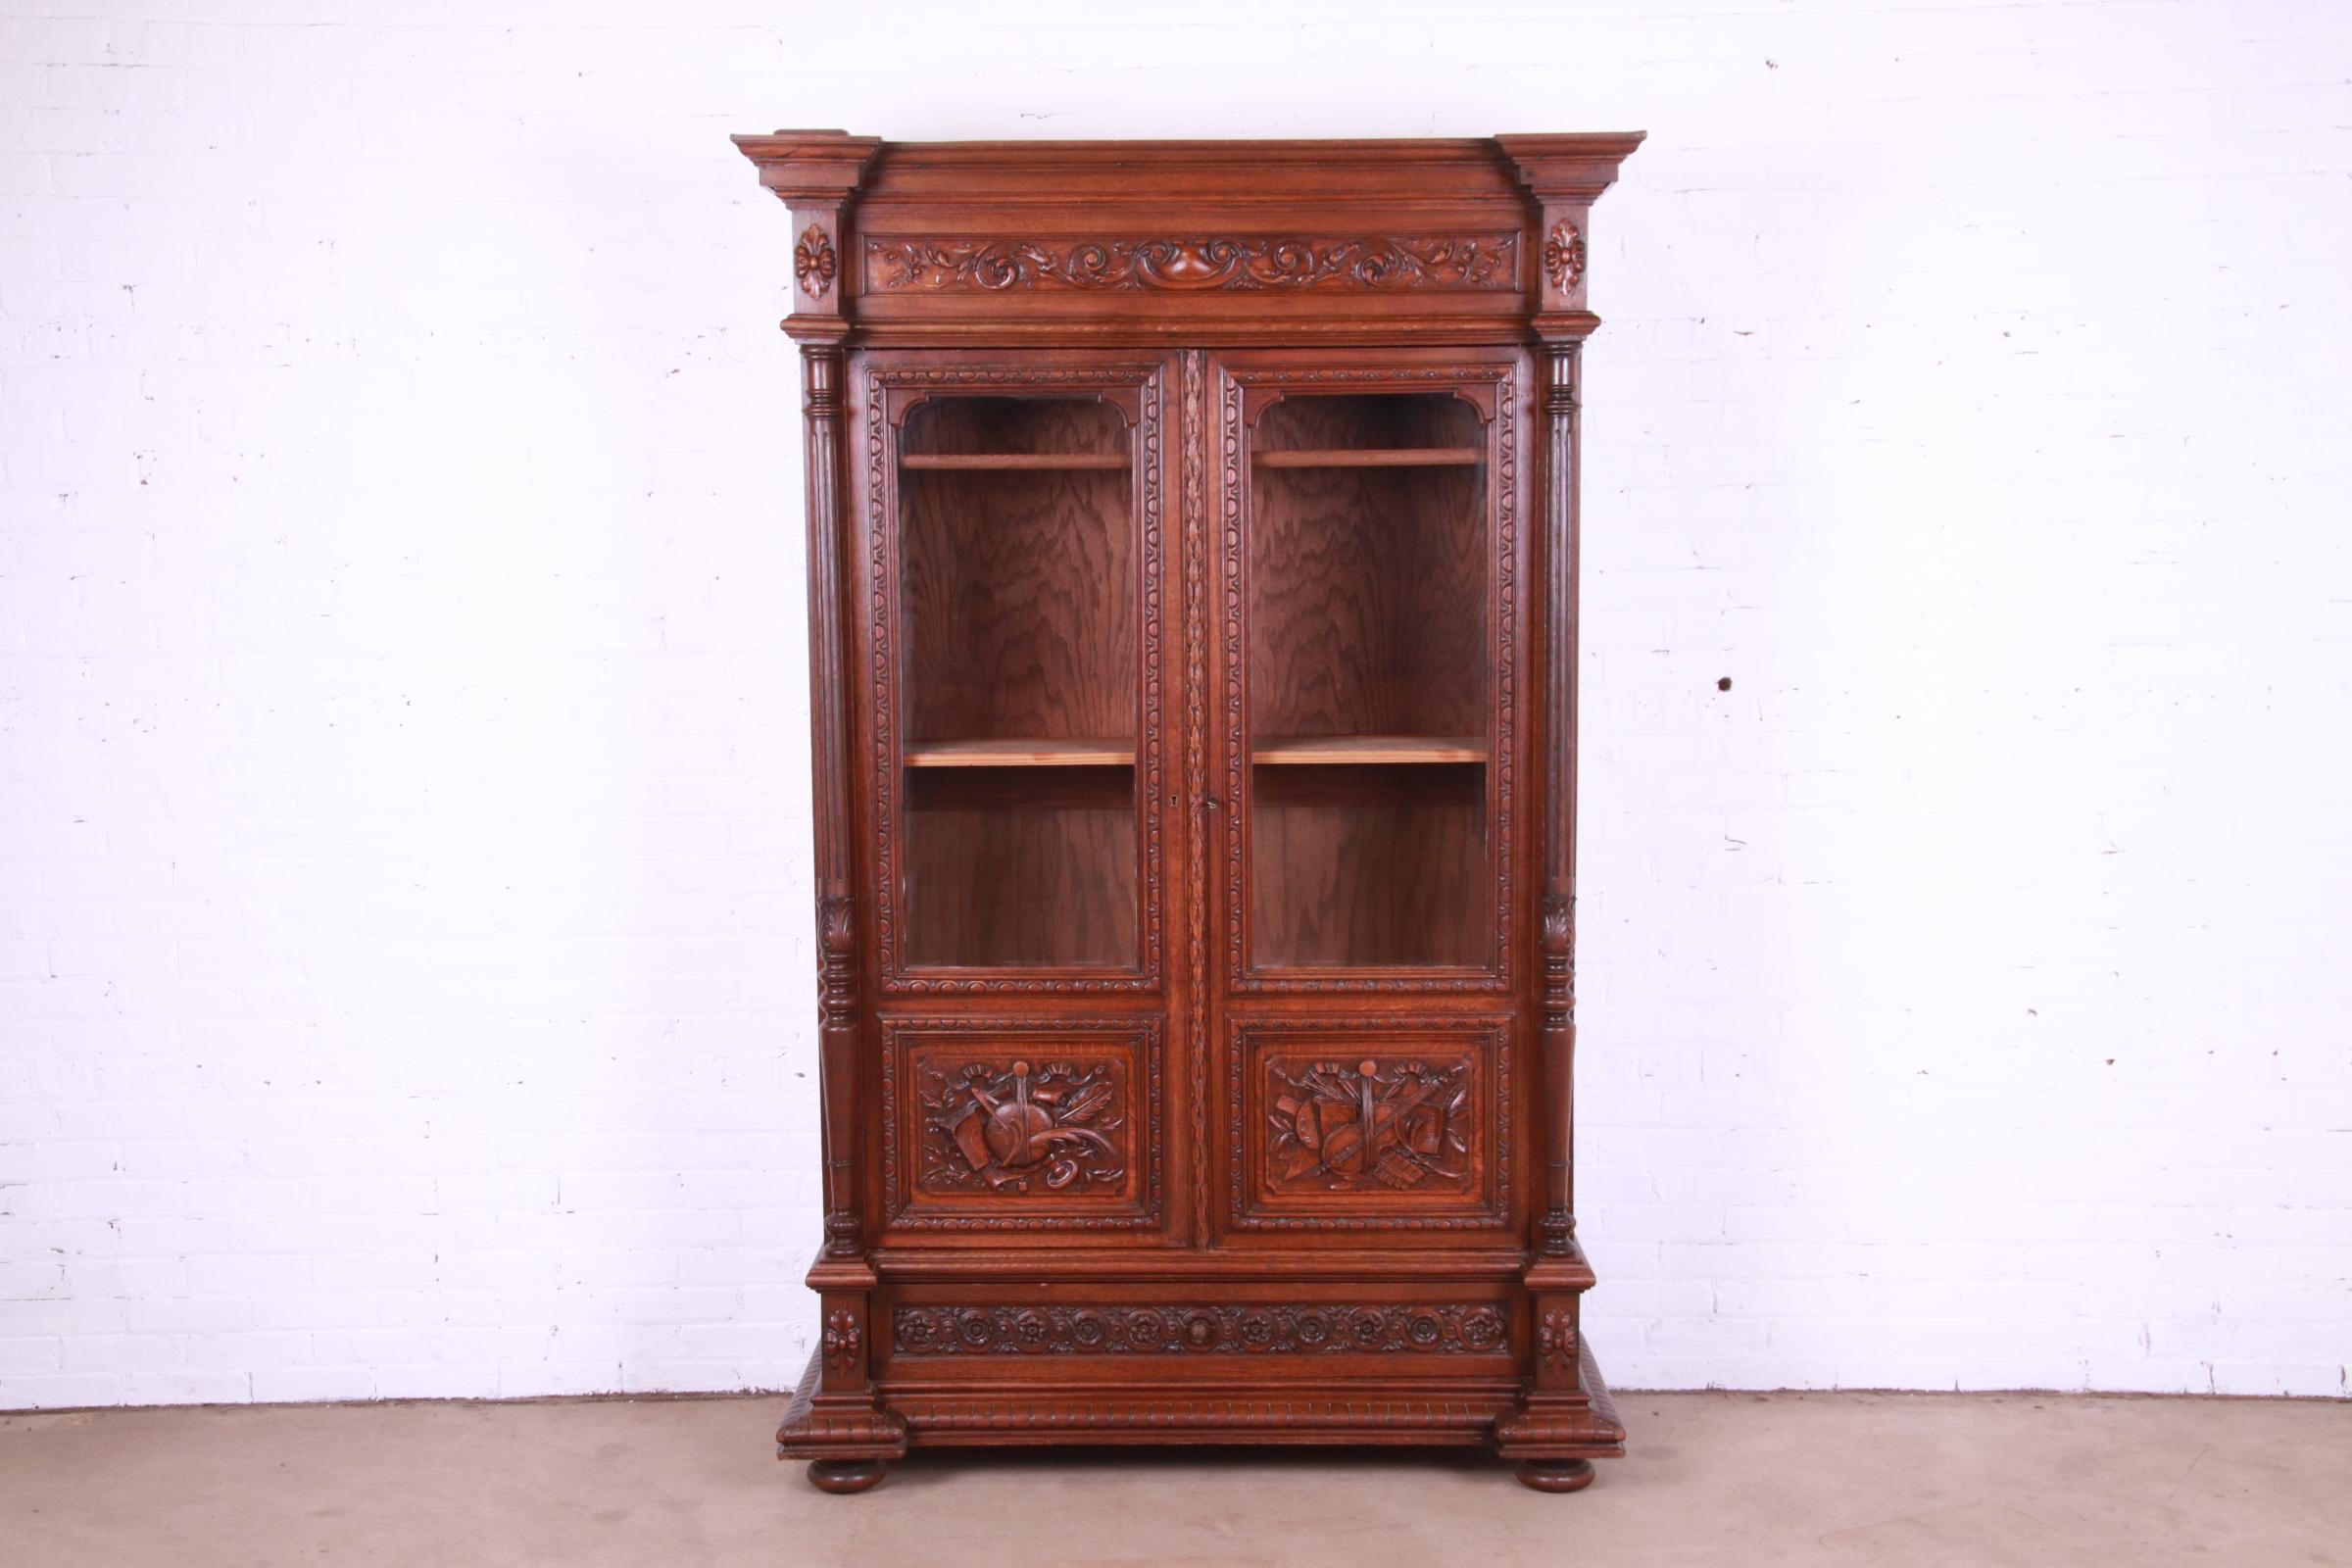 A gorgeous French Renaissance Revival bibliotheque bookcase cabinet

France, Circa 1900

Carved oak, with glass front doors. Cabinet locks, and key is included.

Measures: 53